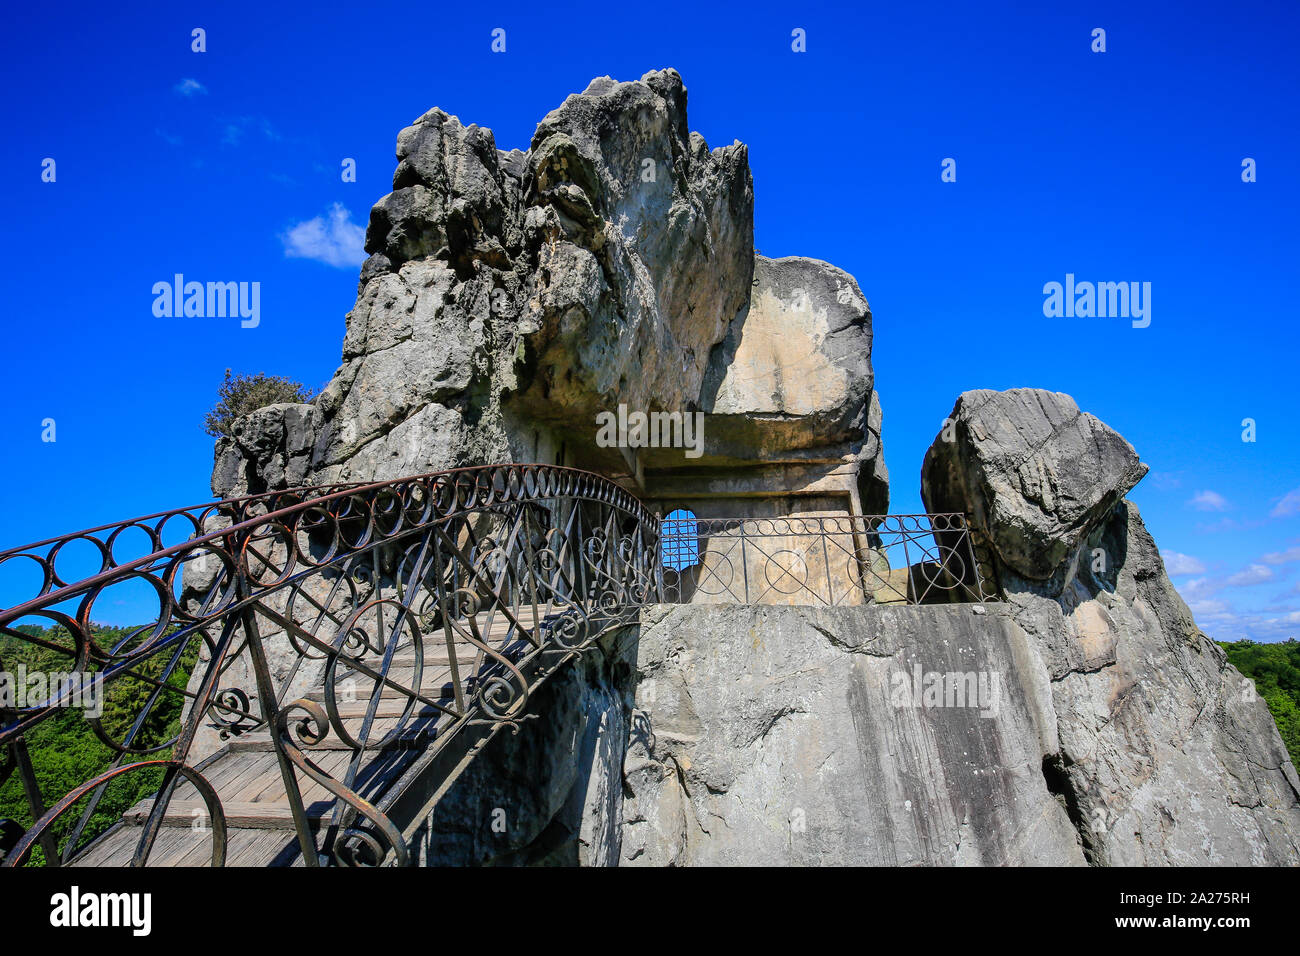 29.05.2019, Horn-Bad Meinberg, North Rhine-Westphalia, Germany - Externsteine, a striking sandstone rock formation in the Teutoburg Forest and as such Stock Photo